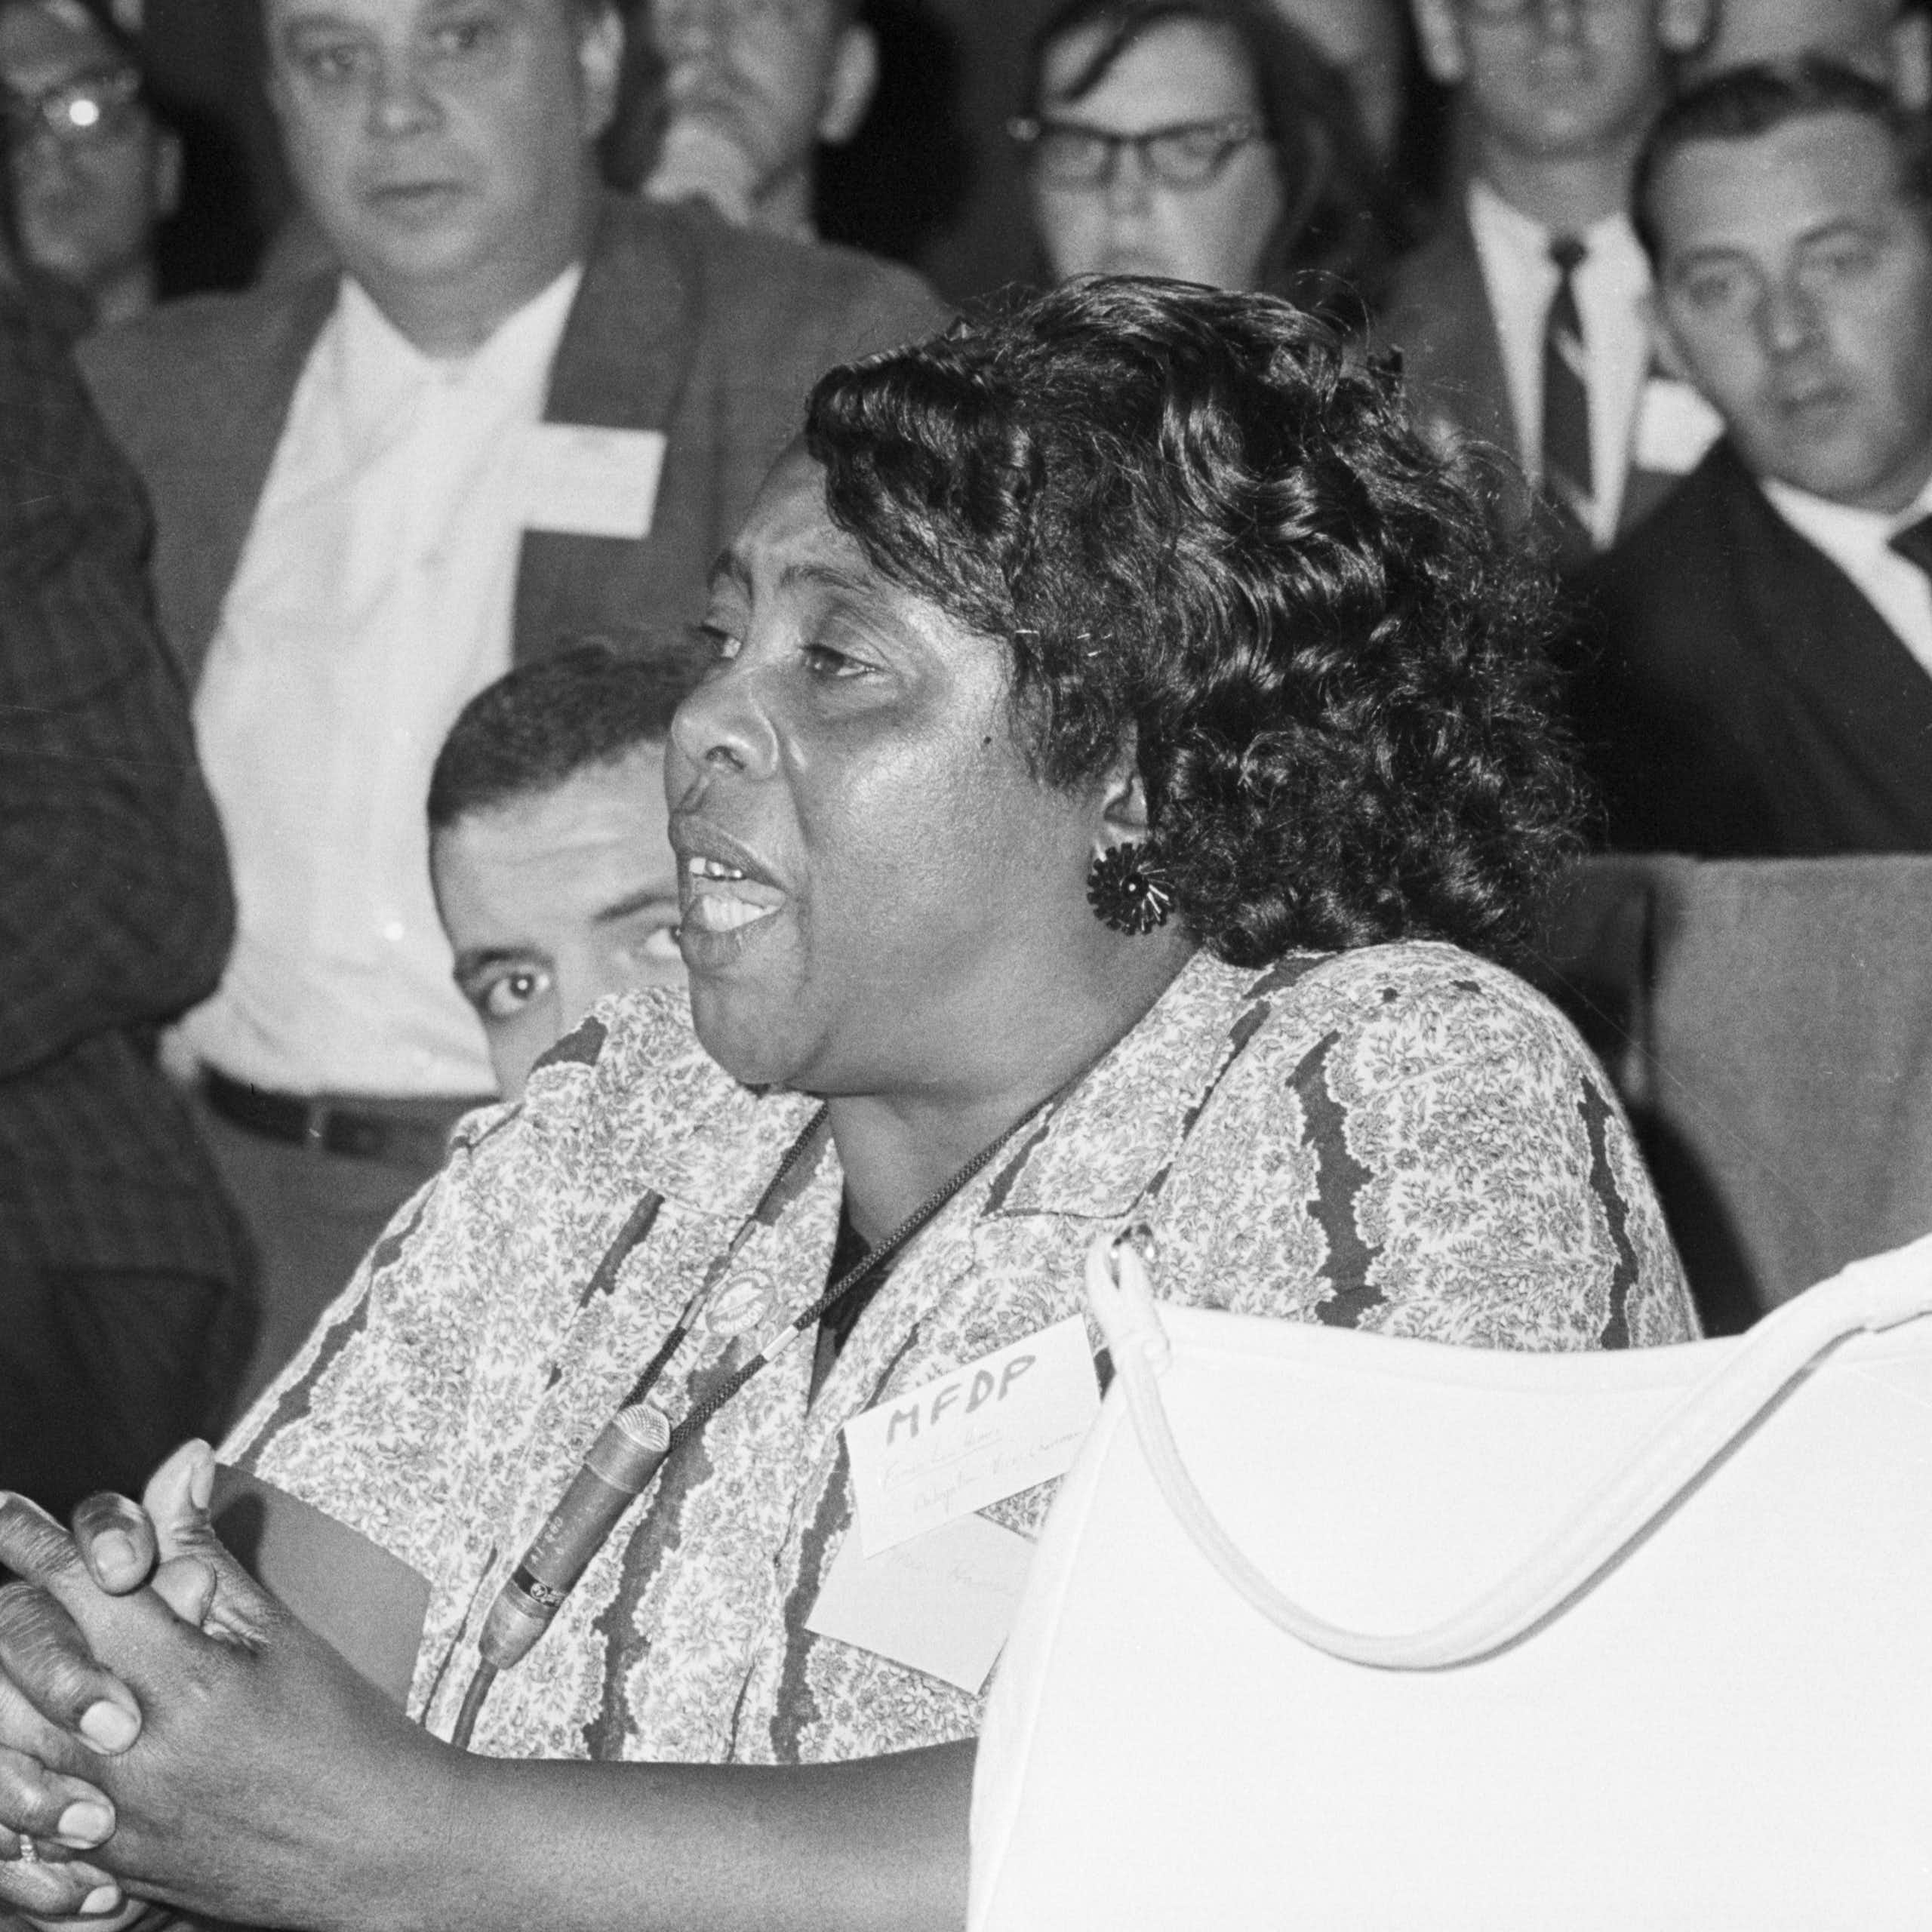 A Black woman sits behind a desk with her hands clasped together as a gathering of white men listen to her speech.at a desk and in speaking with a microphone. 